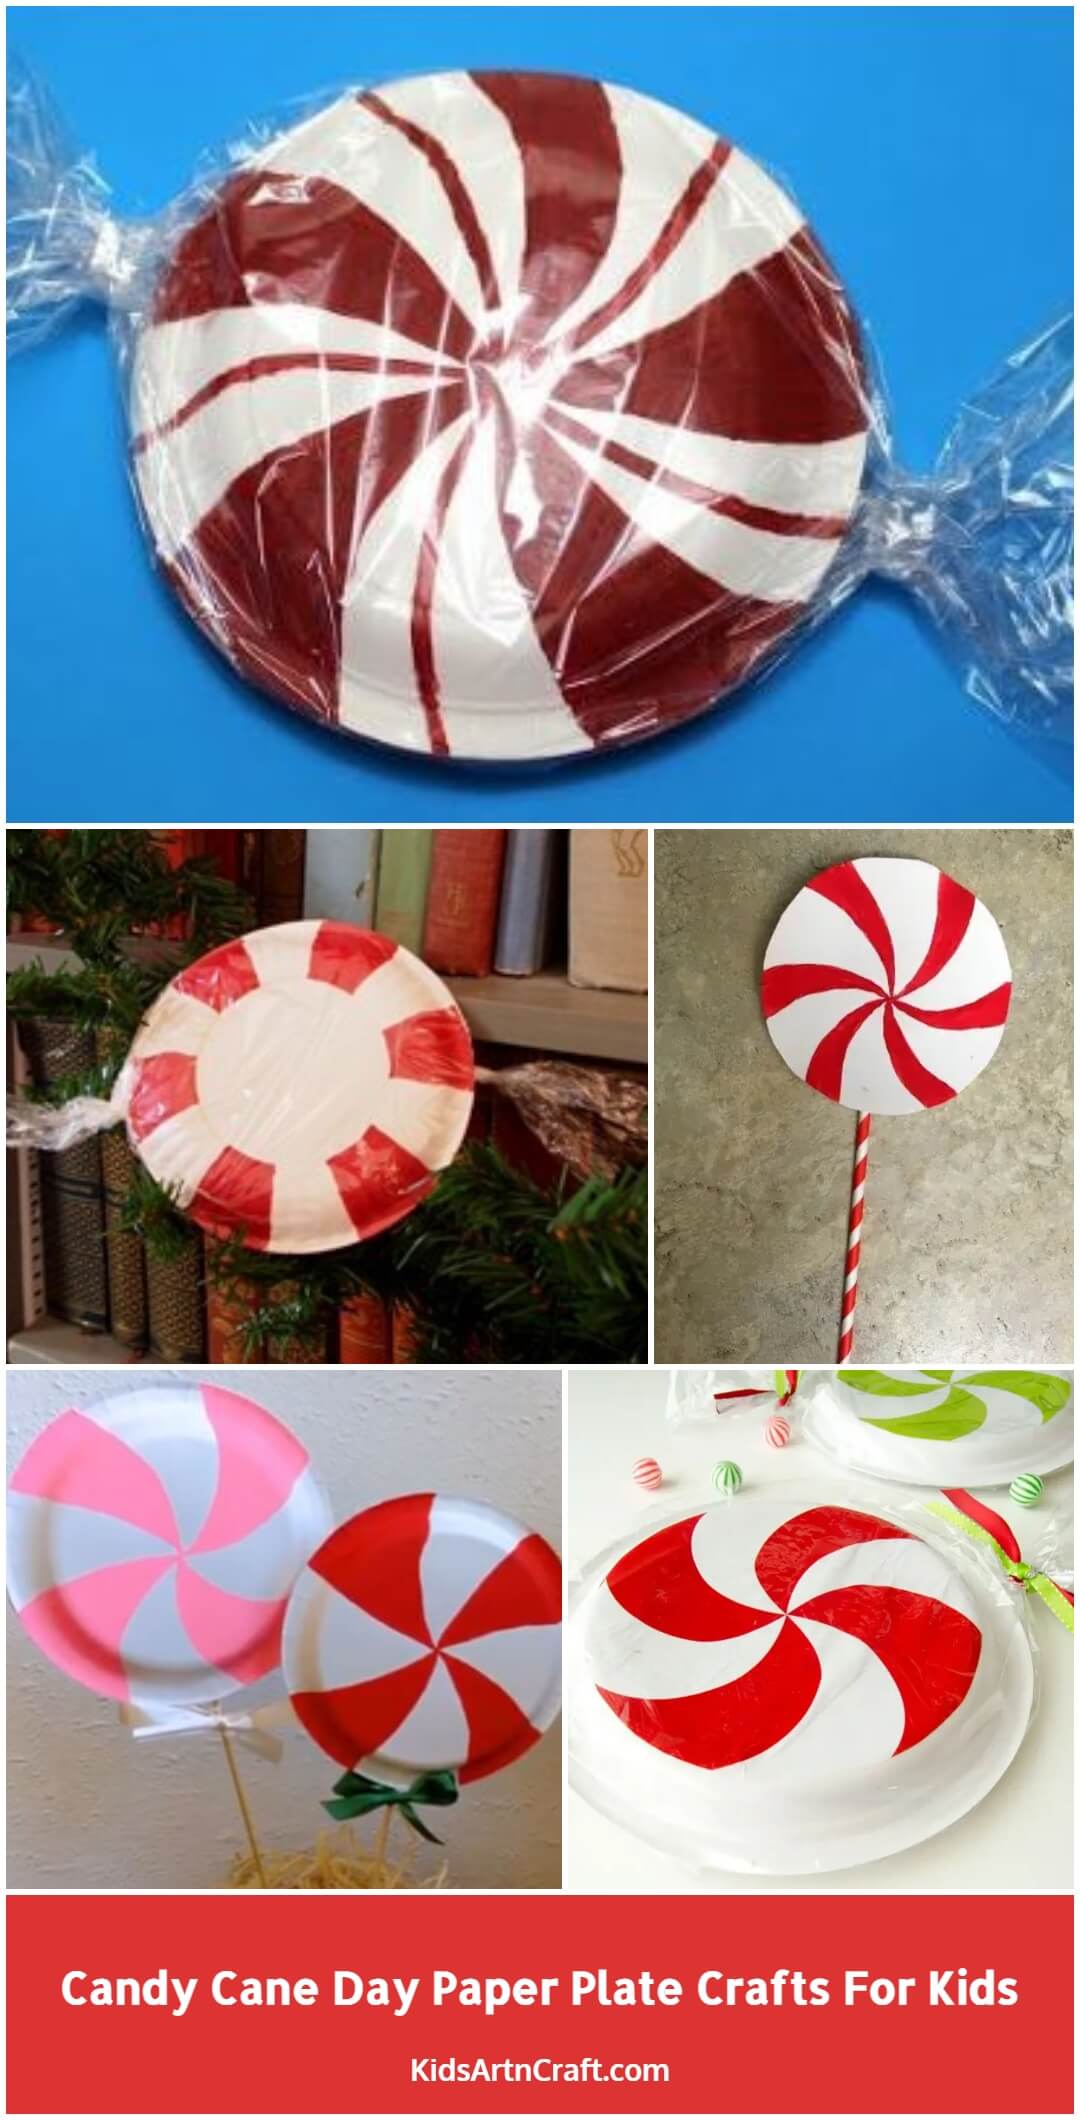 Candy Cane Day Paper Plate Crafts For Kids